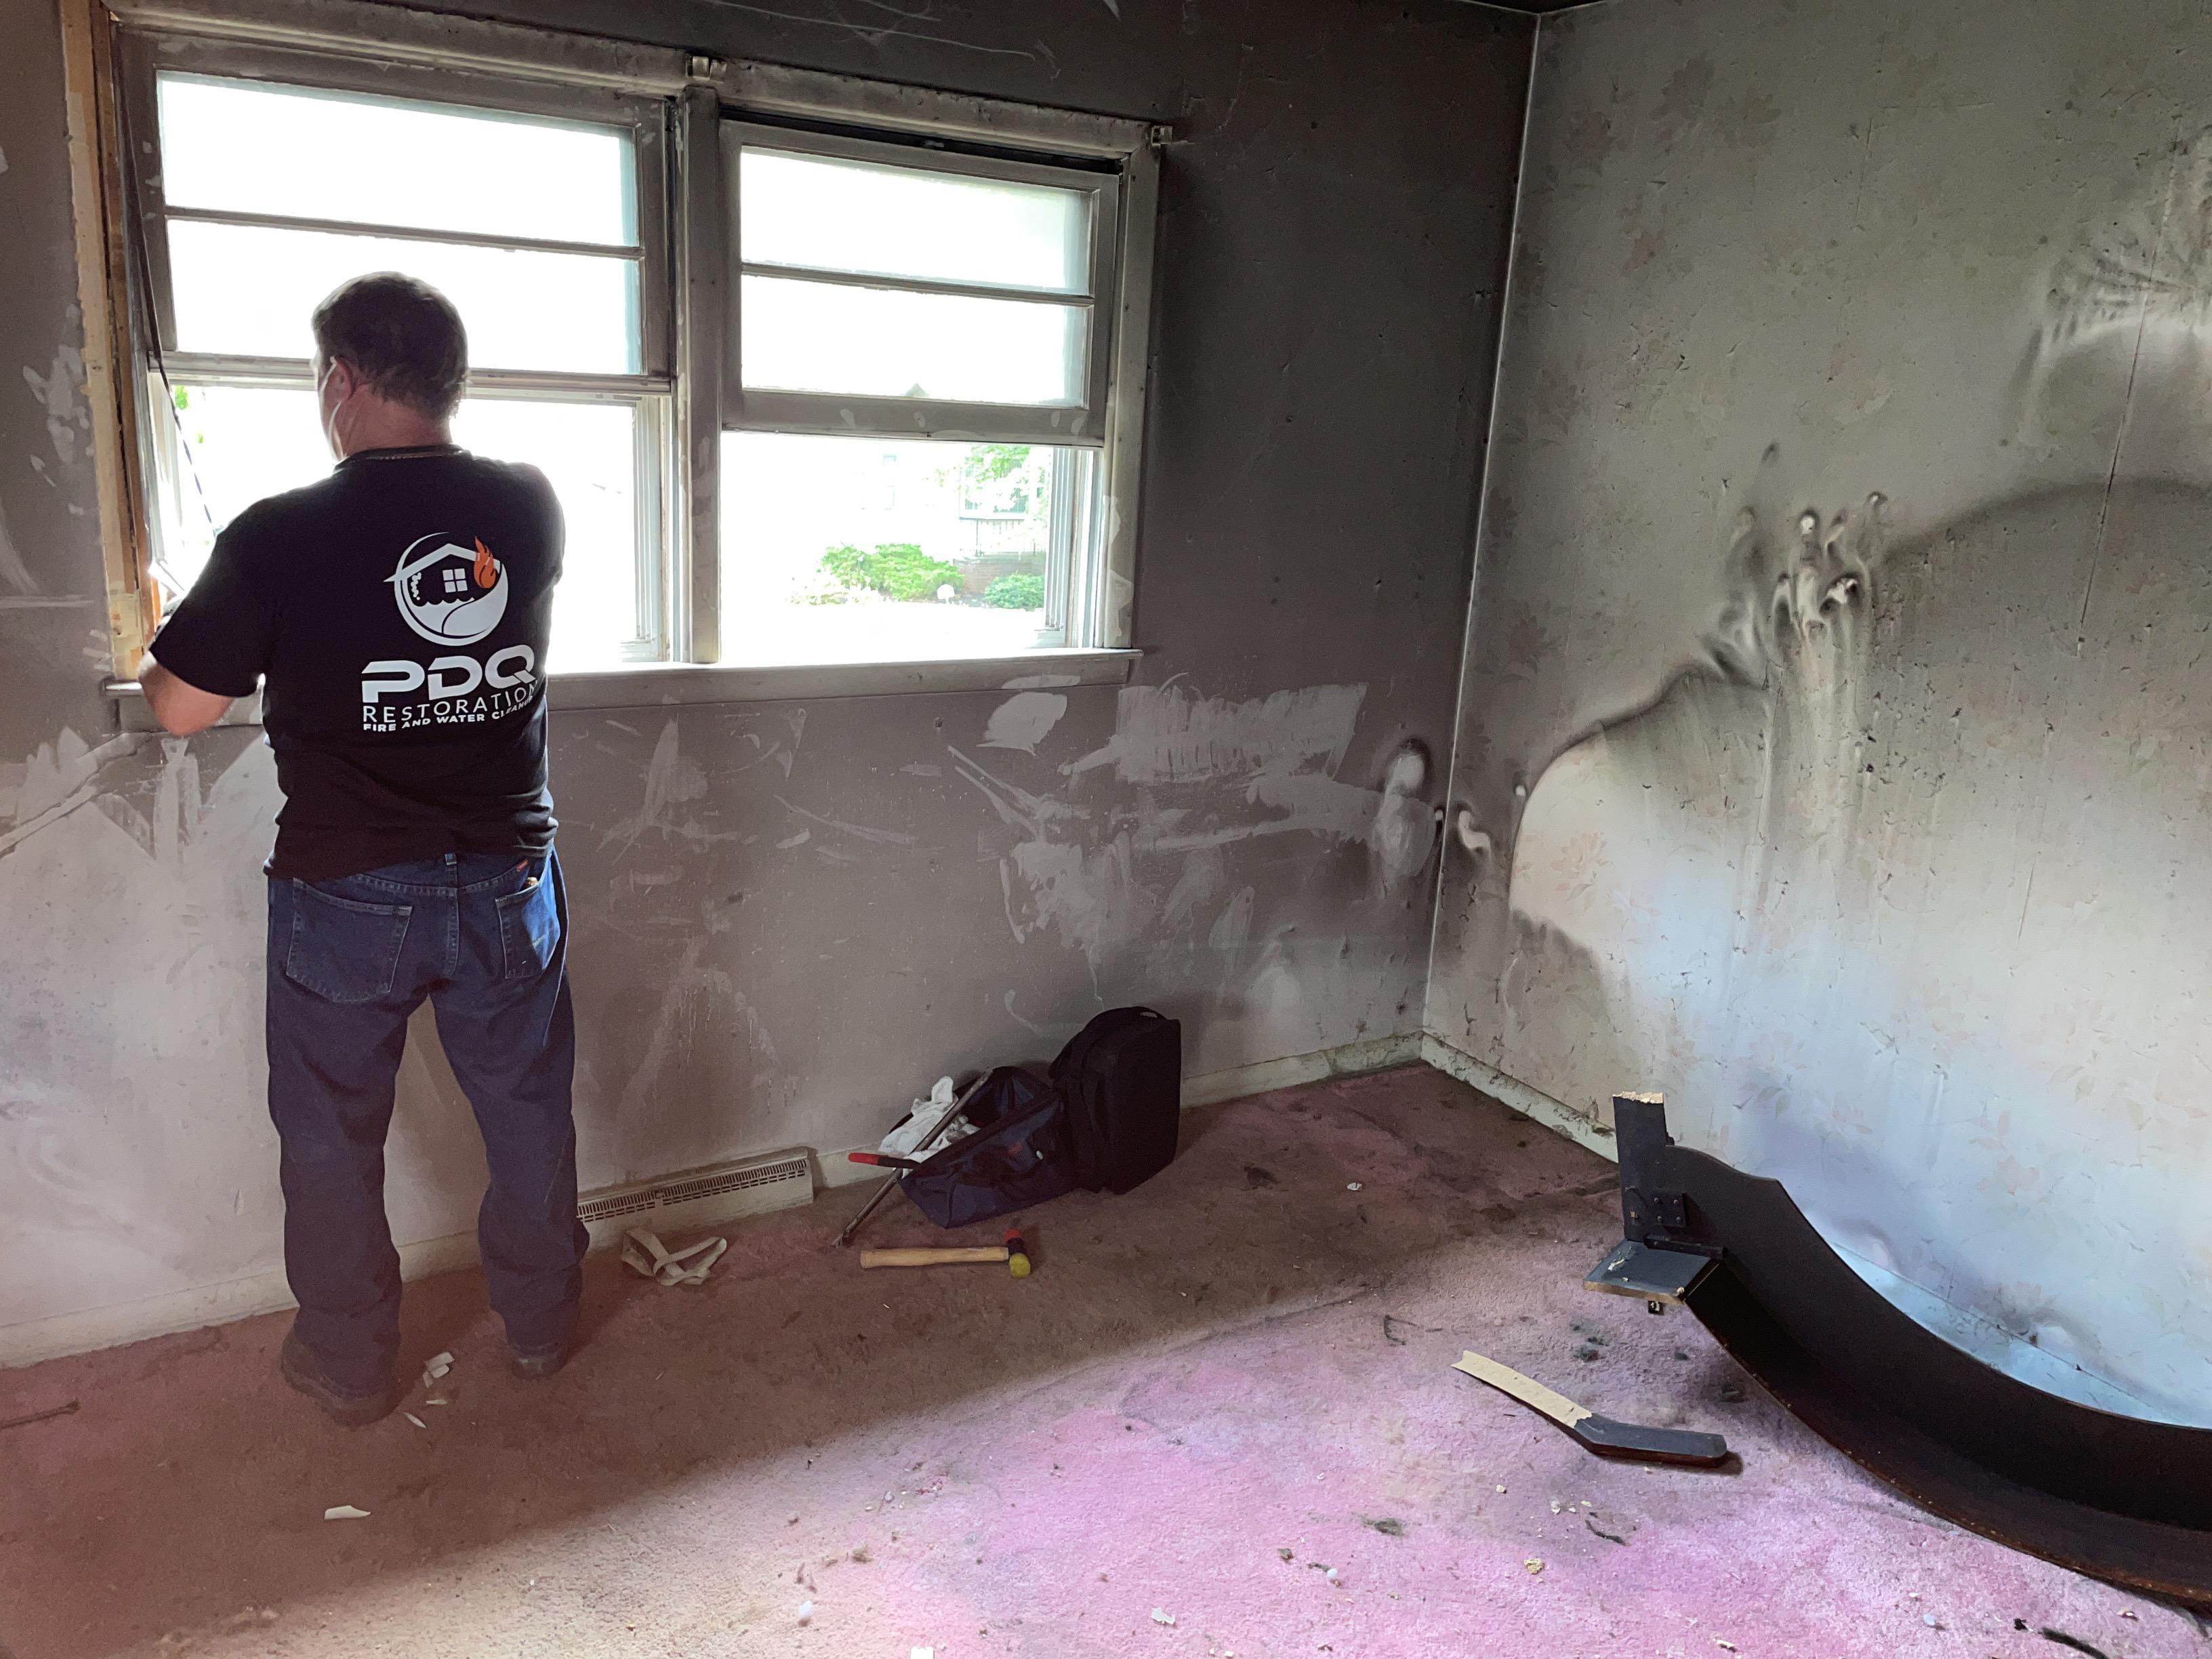 bedroom being cleaned up that was impacted by fire and soot build-up